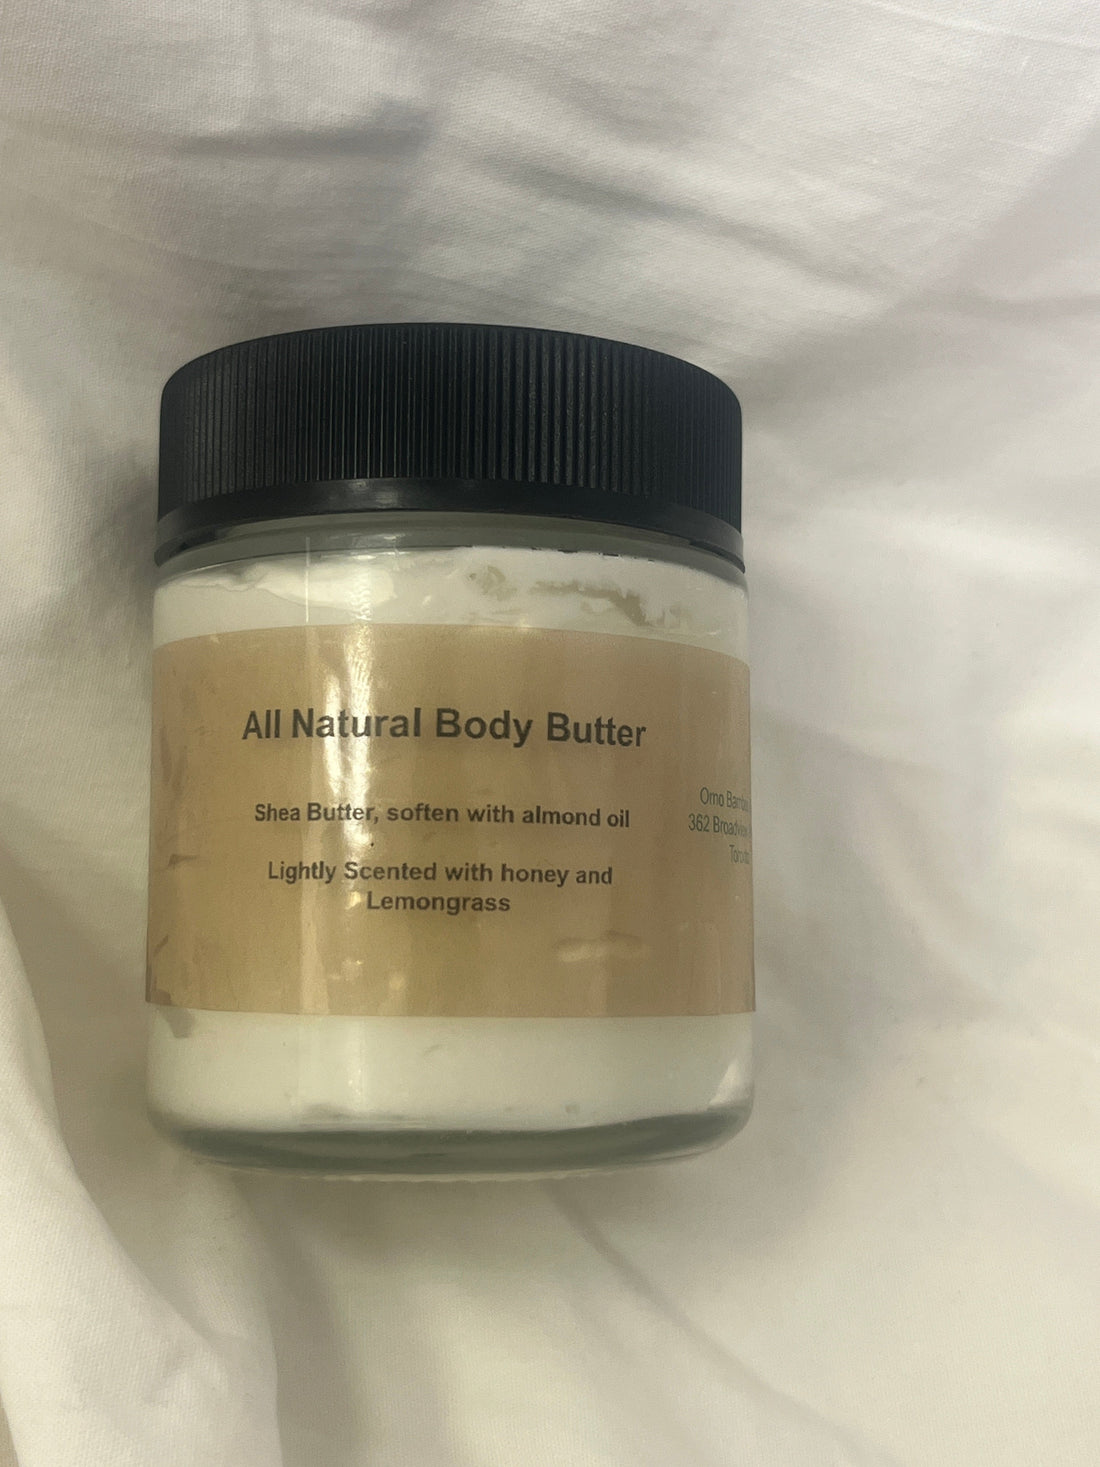 All Natural Body Butter: The Secret to Nourished Skin